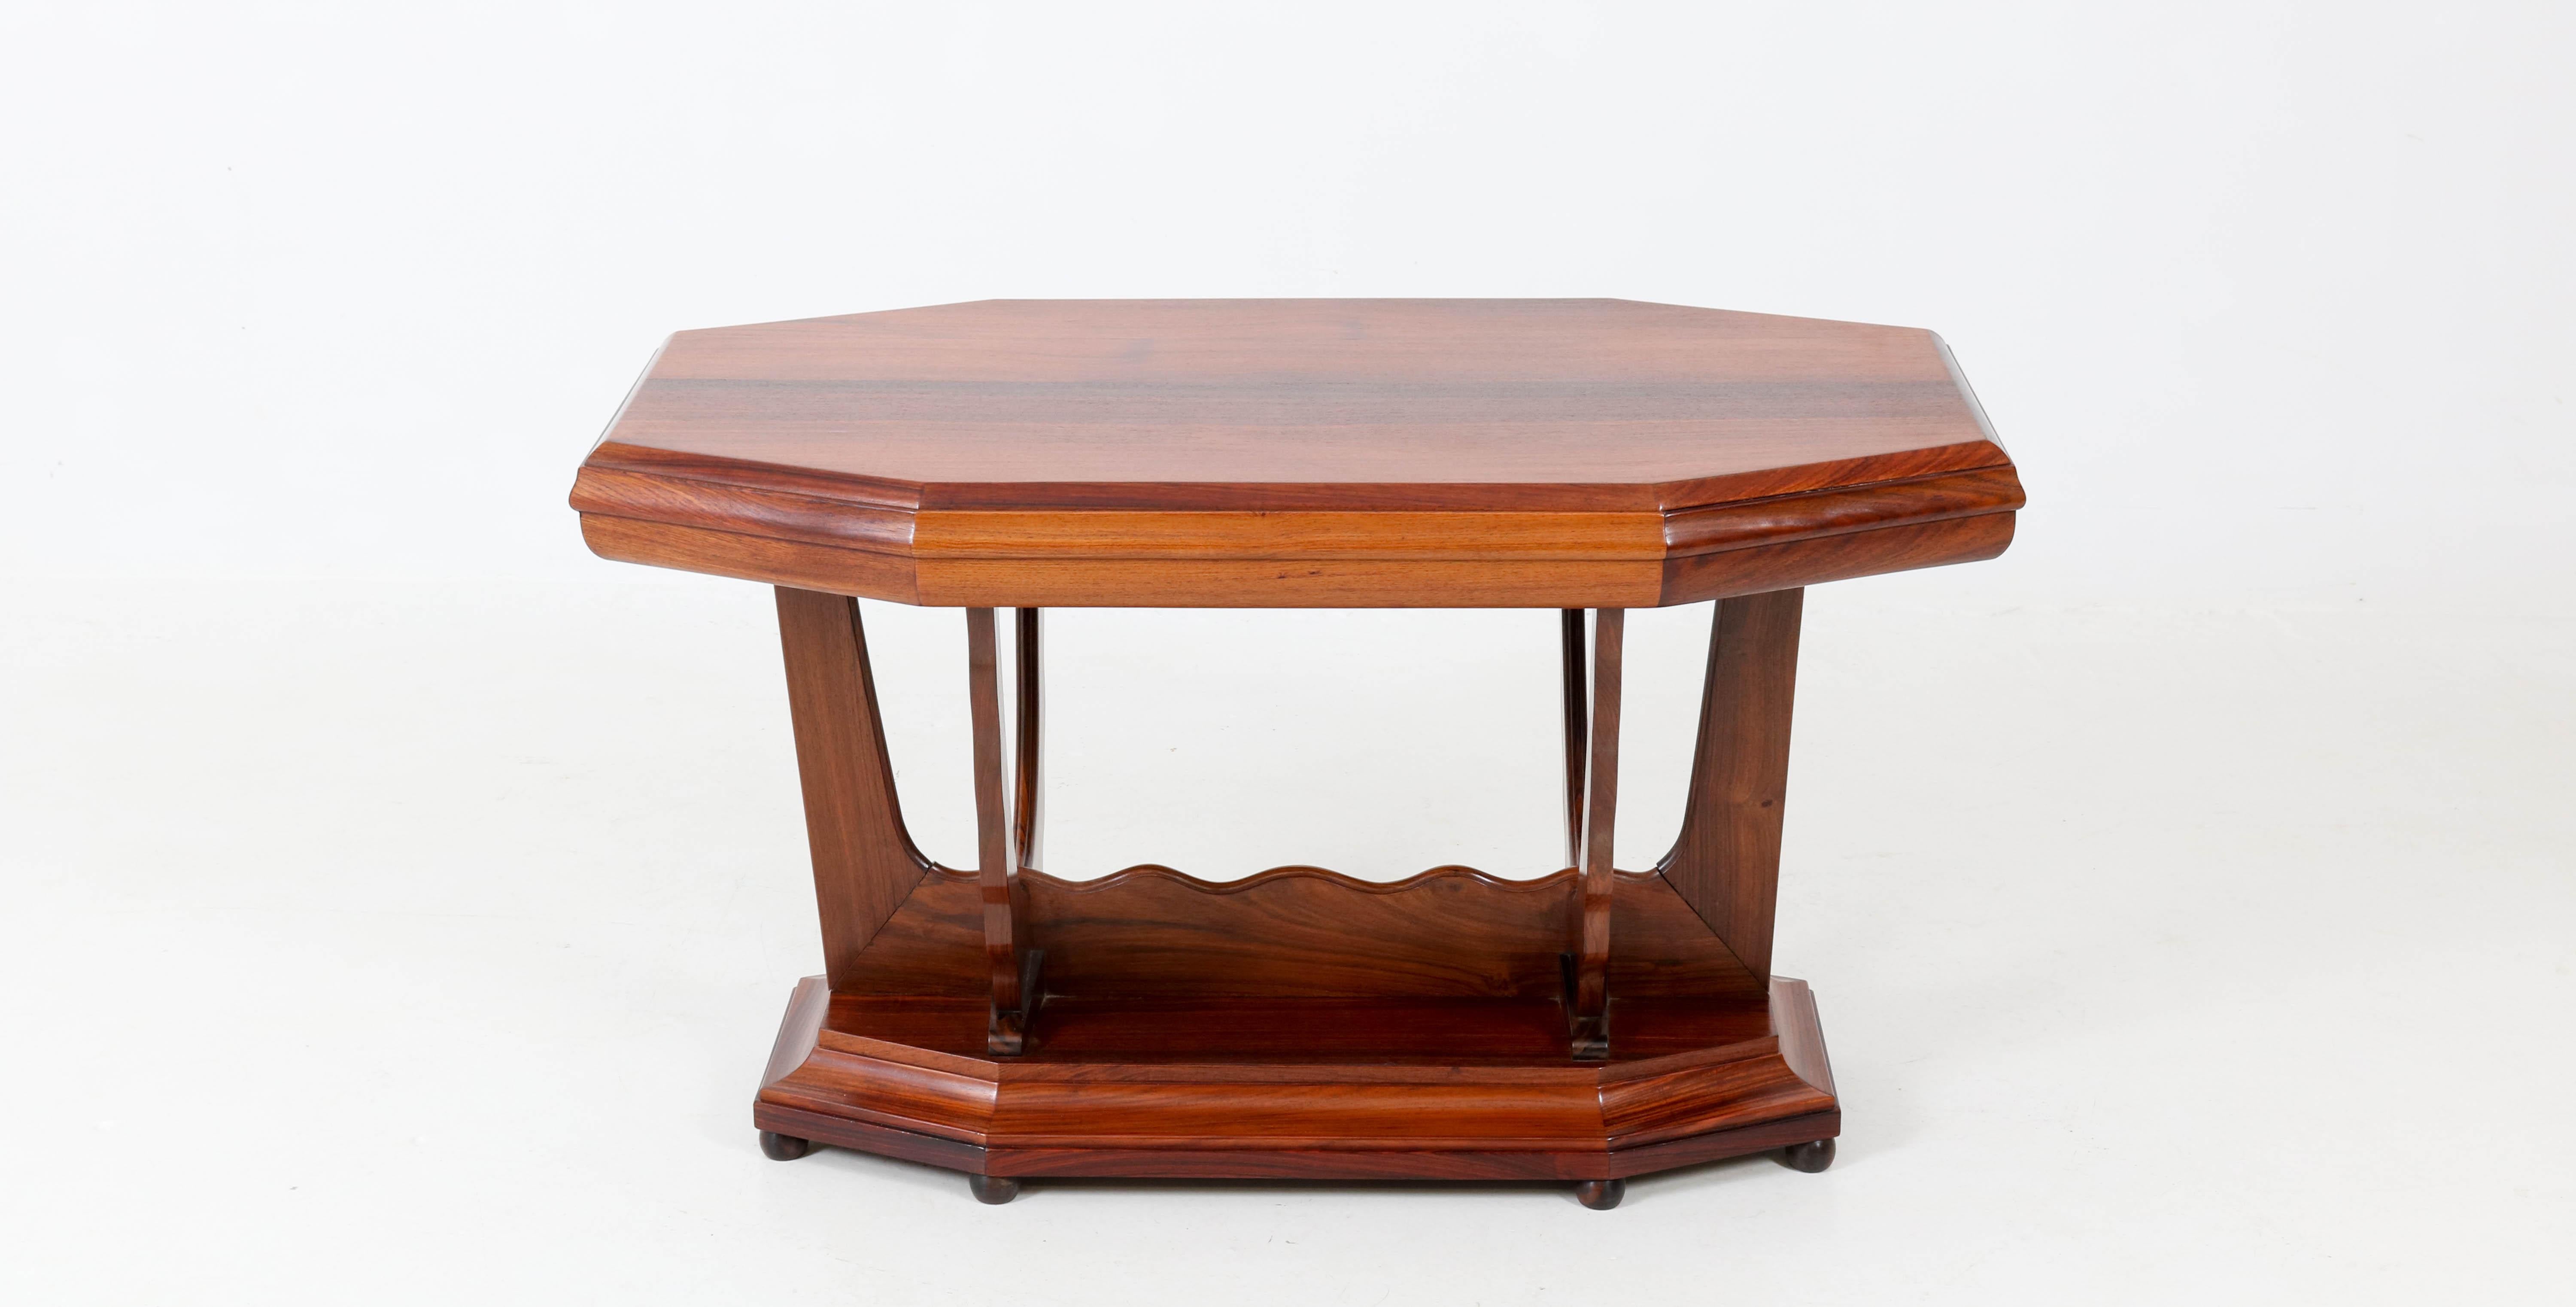 Stunning and rare Art Deco Amsterdam School side table.
Attributed to Max Coini Amsterdam.
Striking Dutch design in solid rosewood from the 1920s.
In good original condition with minor wear consistent with age and use,
preserving a beautiful